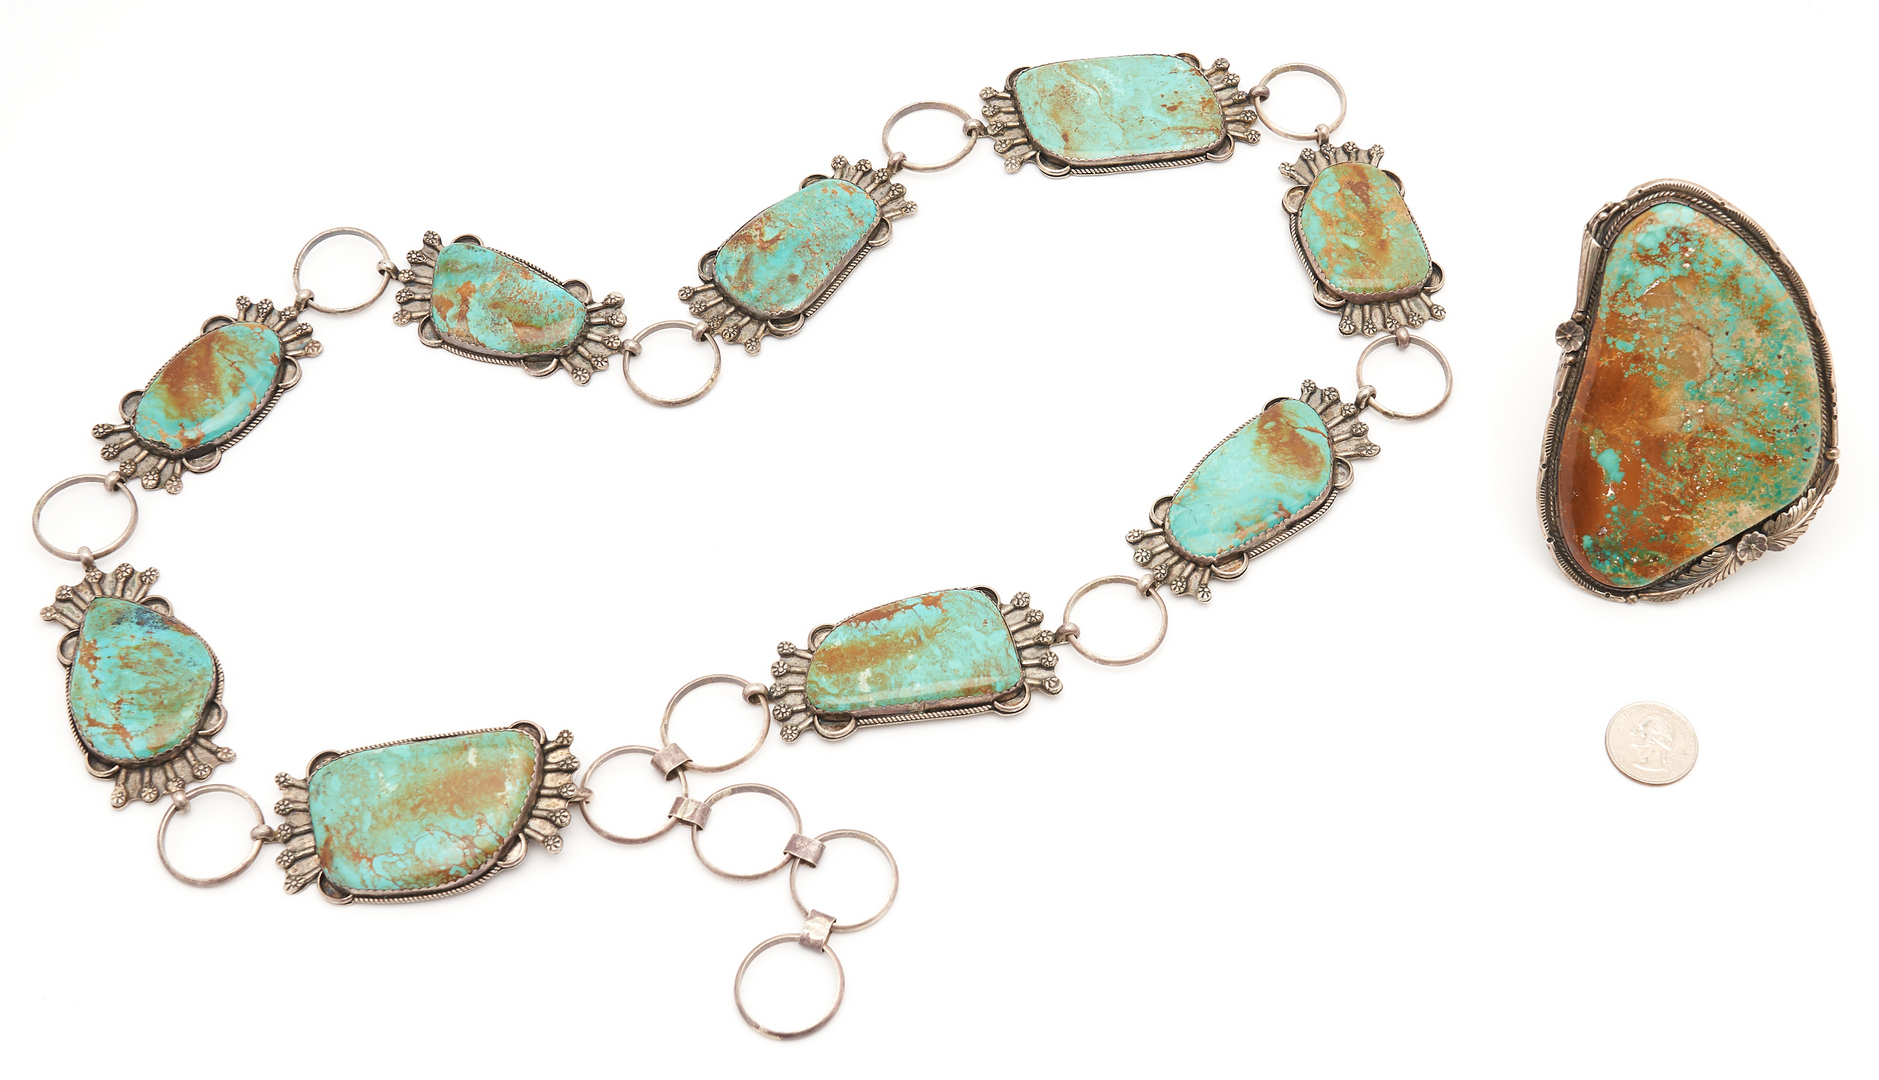 Lot 645: Native American Silver & Turquoise Belt and Cuff Bracelet